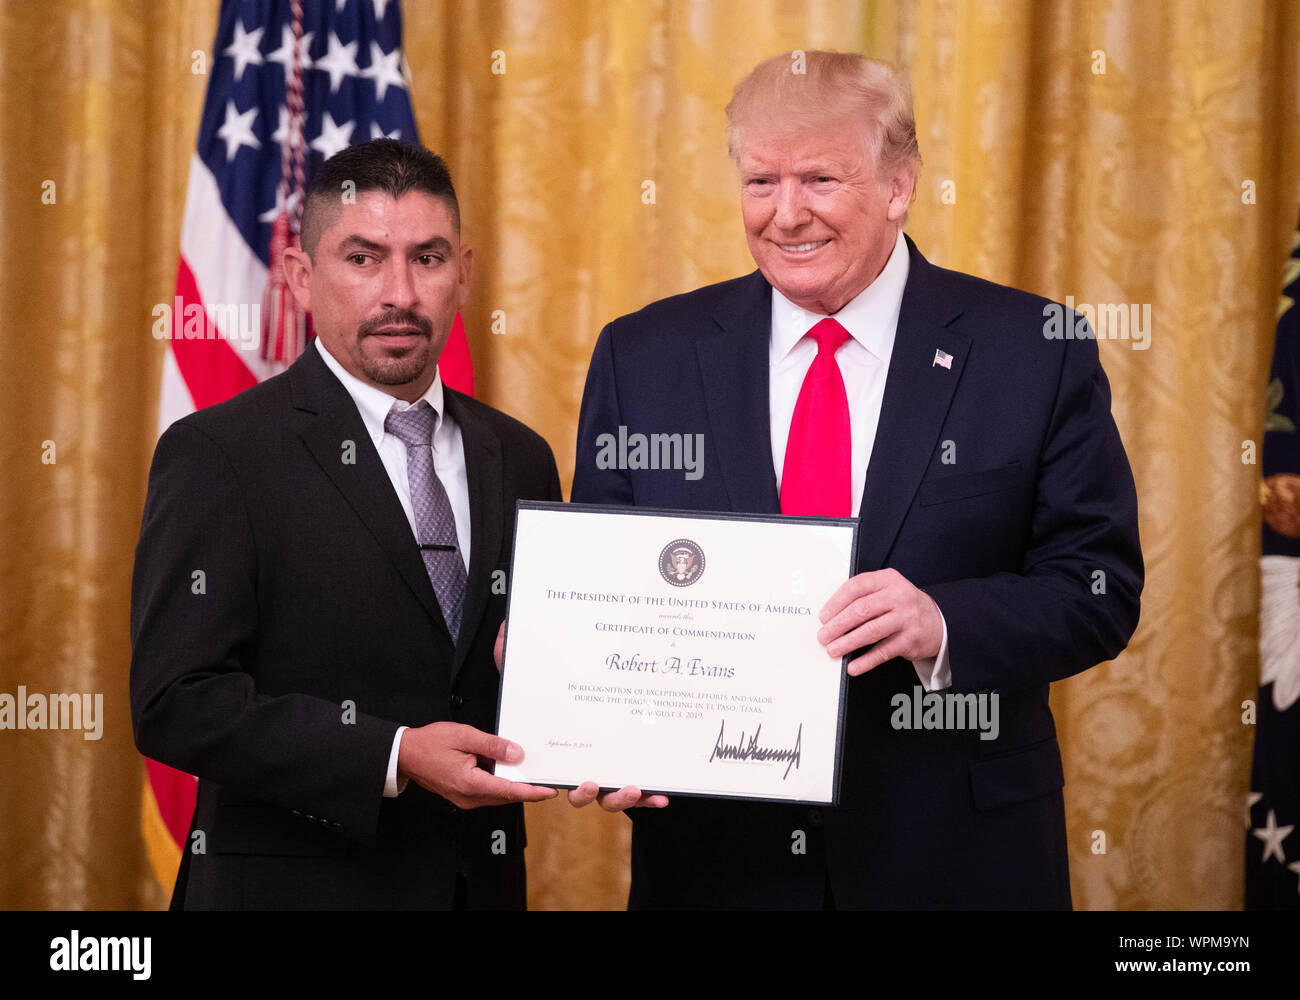 Washington, United States. 09th Sep, 2019. President Donald Trump awards a Heroic Commendations to Robert Evans for his heroic actions during a mass shooting, during a ceremony in the East Room at the White House in Washington, DC on Monday, September 9, 2019. Trump recognized the six Dayton officers who stoped a mass shooting on August 4th and honored 5 civilians who helped during a mass shooting at a Walmart in El Paso a day before. Photo by Kevin Dietsch/UPI Credit: UPI/Alamy Live News Stock Photo